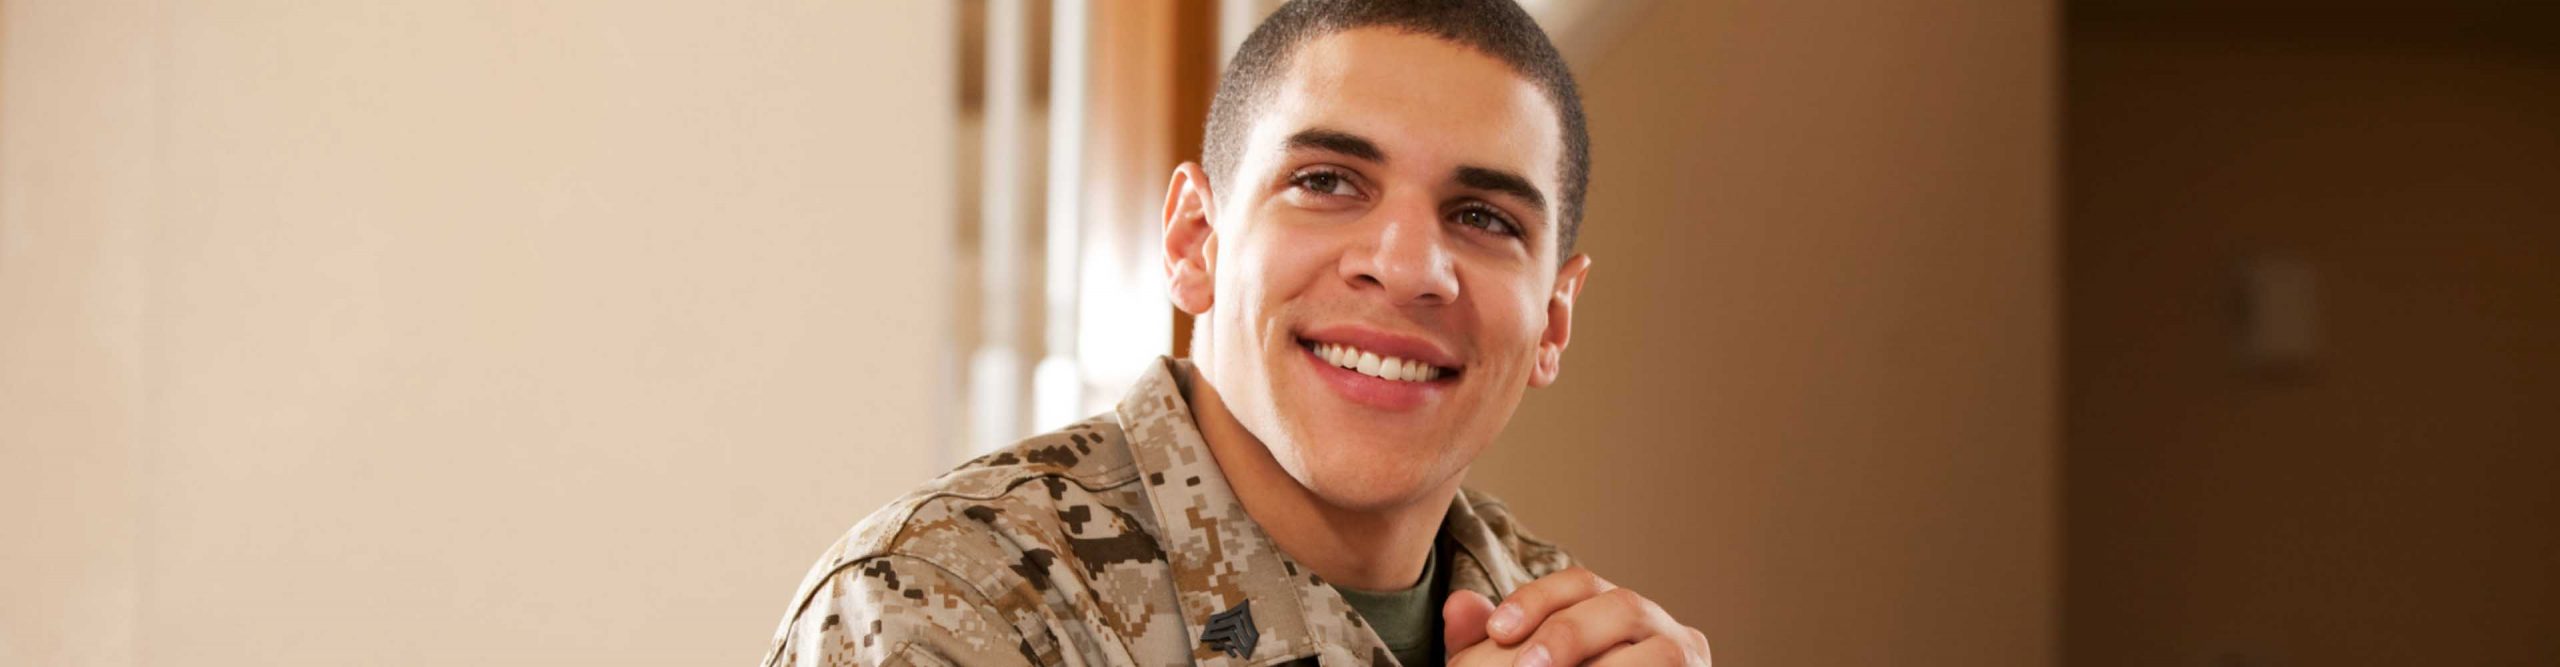 Male service member poses for camera